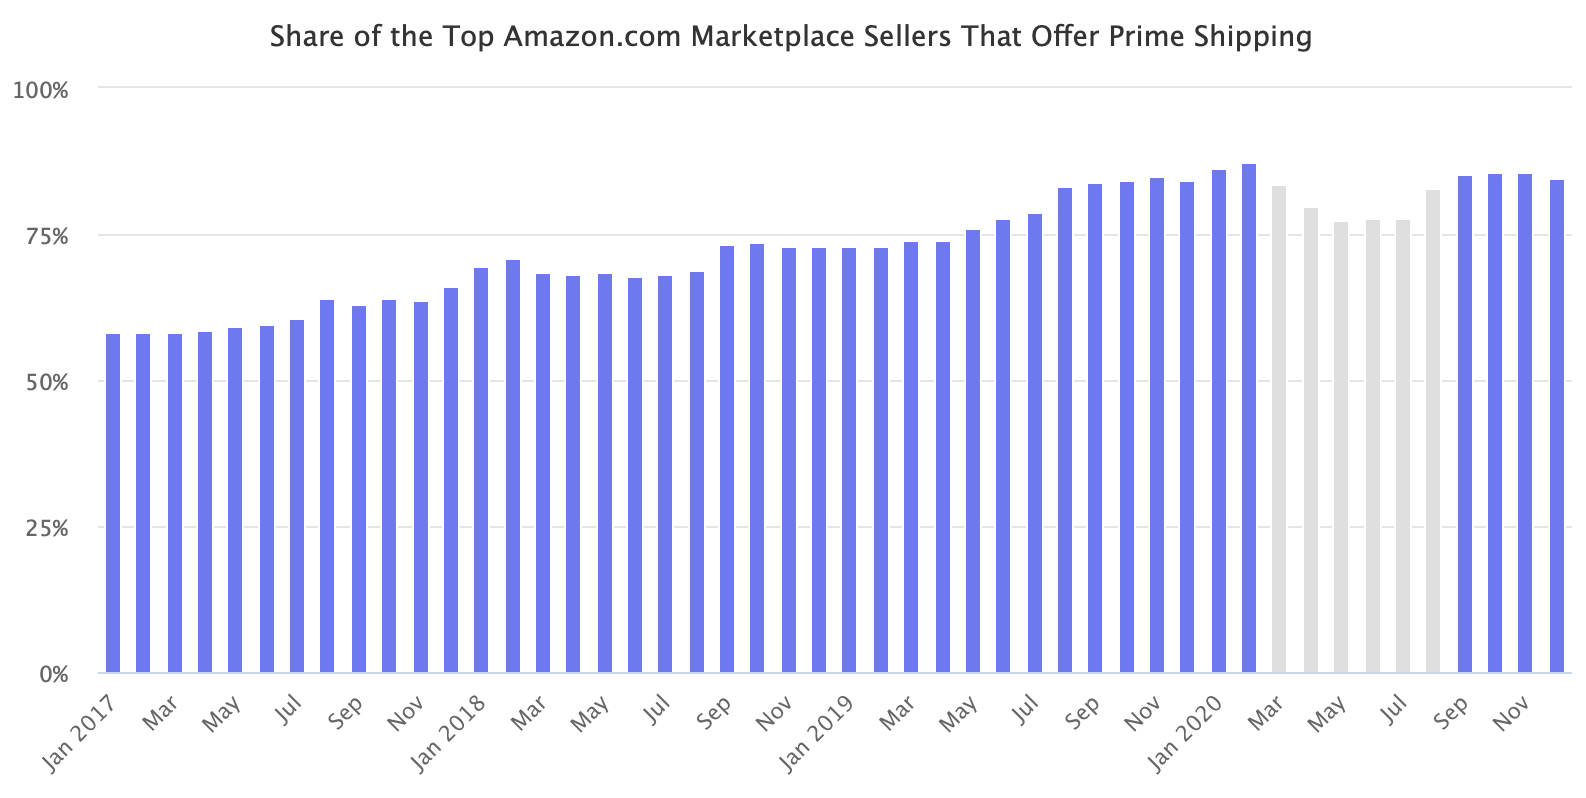 Share of the Top Amazon.com Marketplace Sellers That Offer Prime Shipping